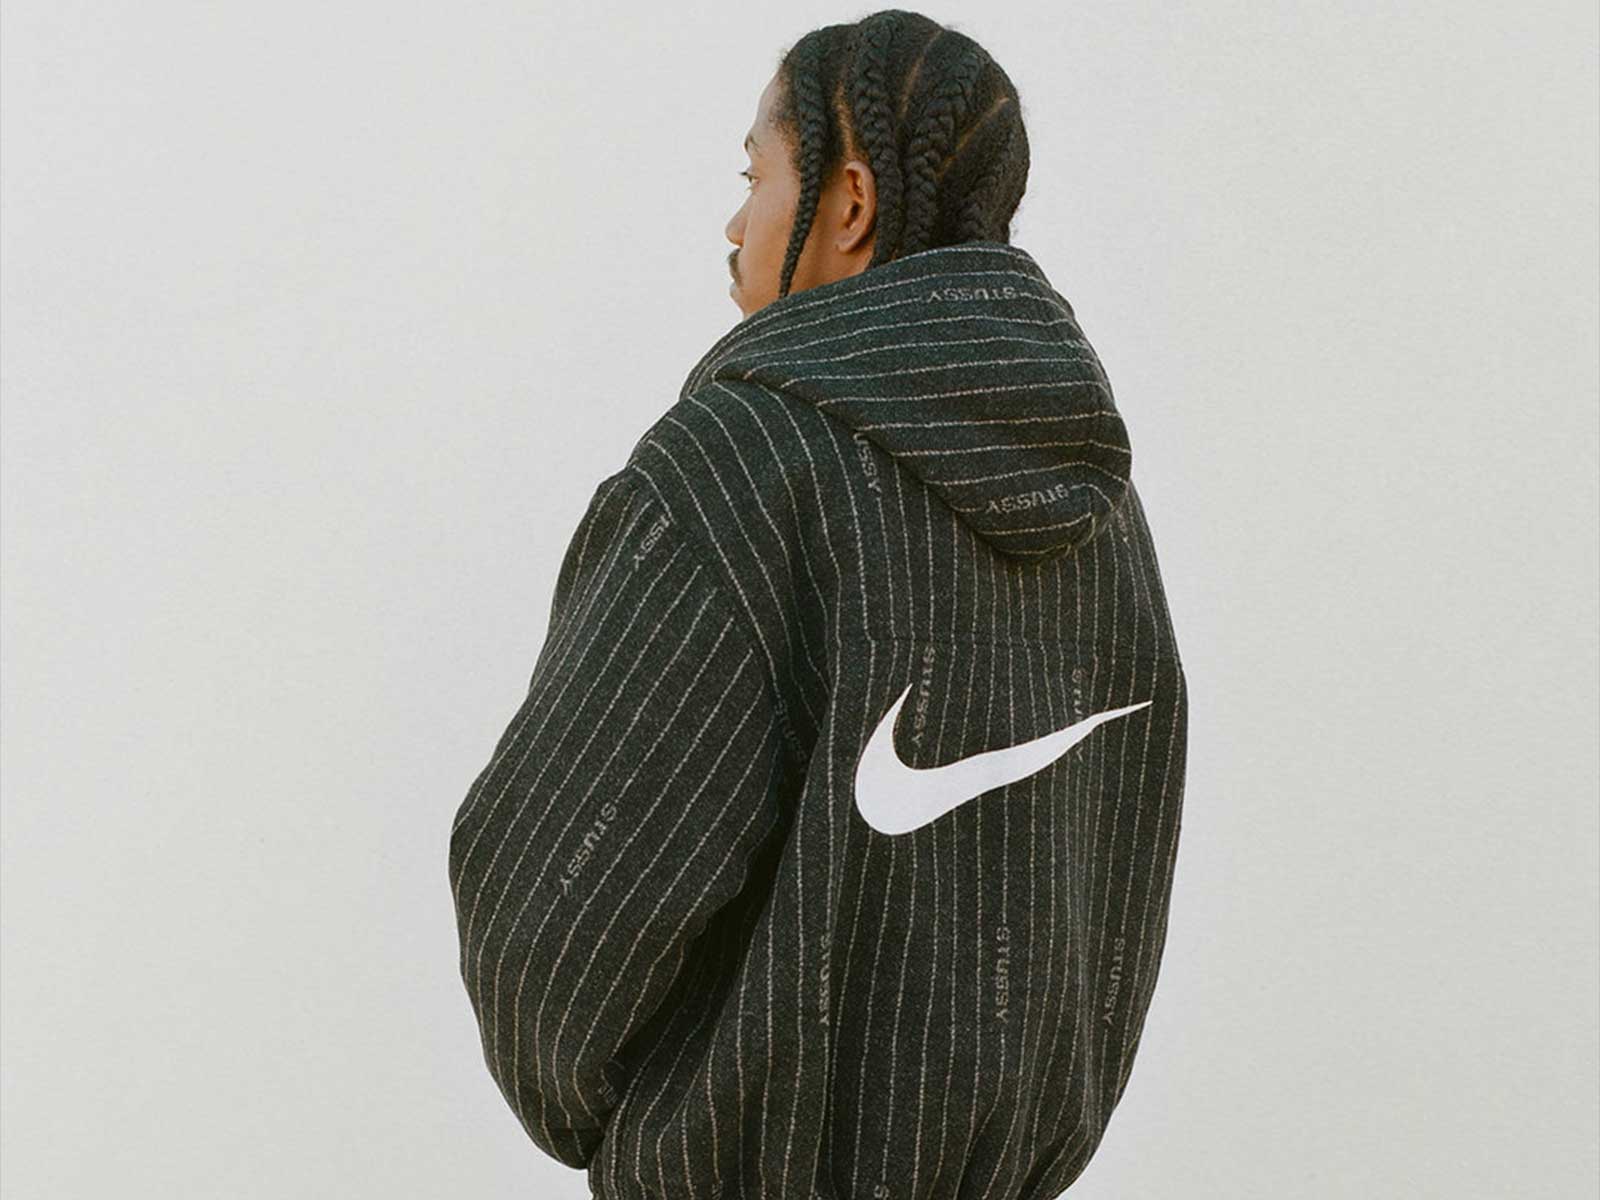 The launch of the new Stüssy x Nike Air Penny 2 will be accompanied by an apparel capsule